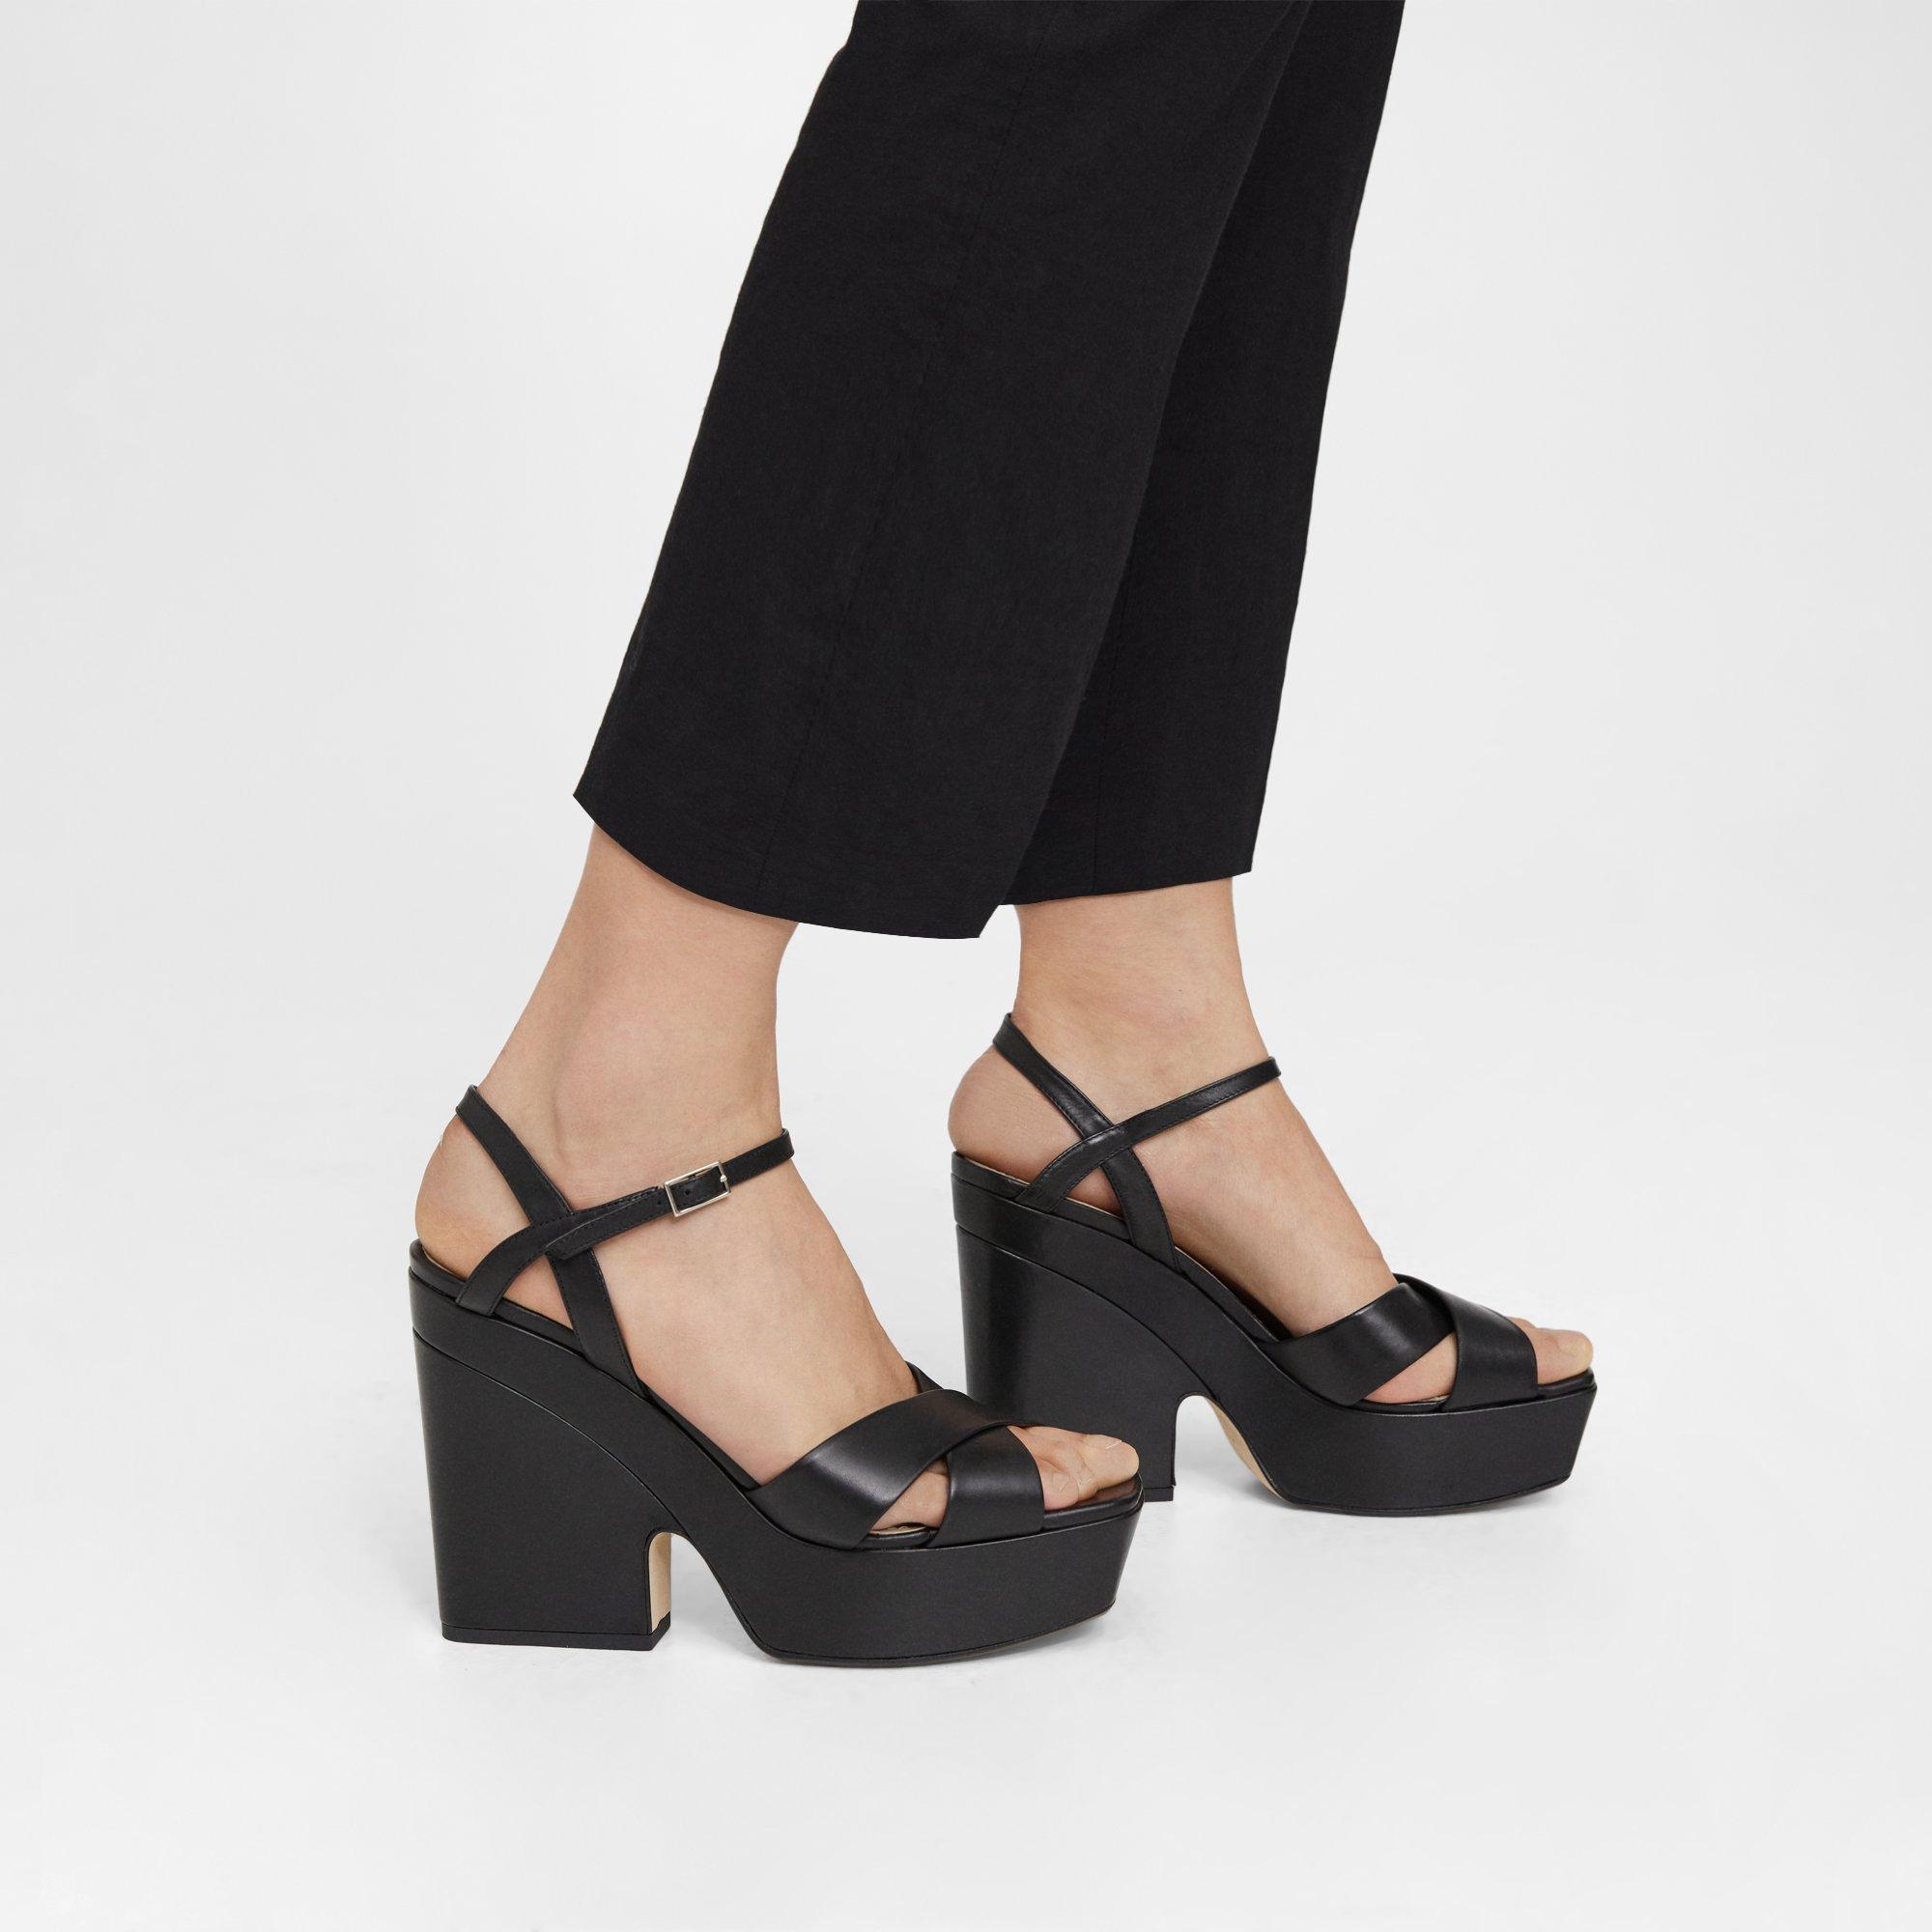 Theory Platform Wedge Sandal in Leather